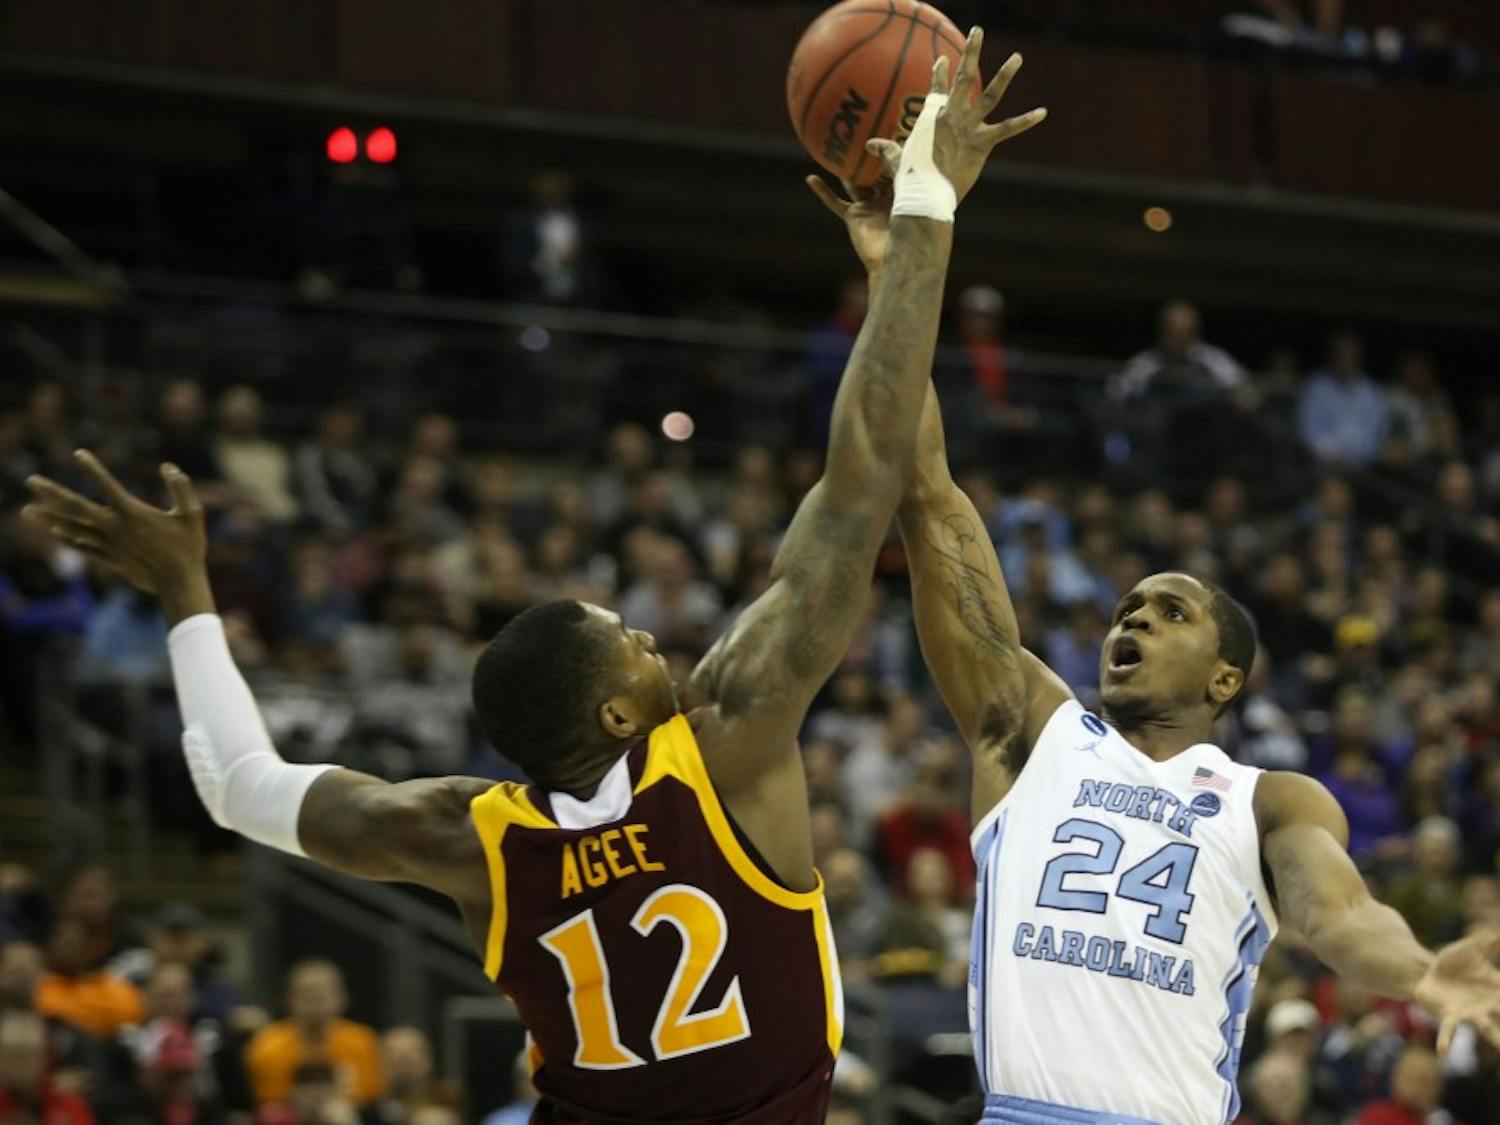 UNC defeated Iona 88-73 in the first round of the NCAA Tournament at Nationwide Arena in Columbus, OH on Friday, March 22, 2019.&nbsp;